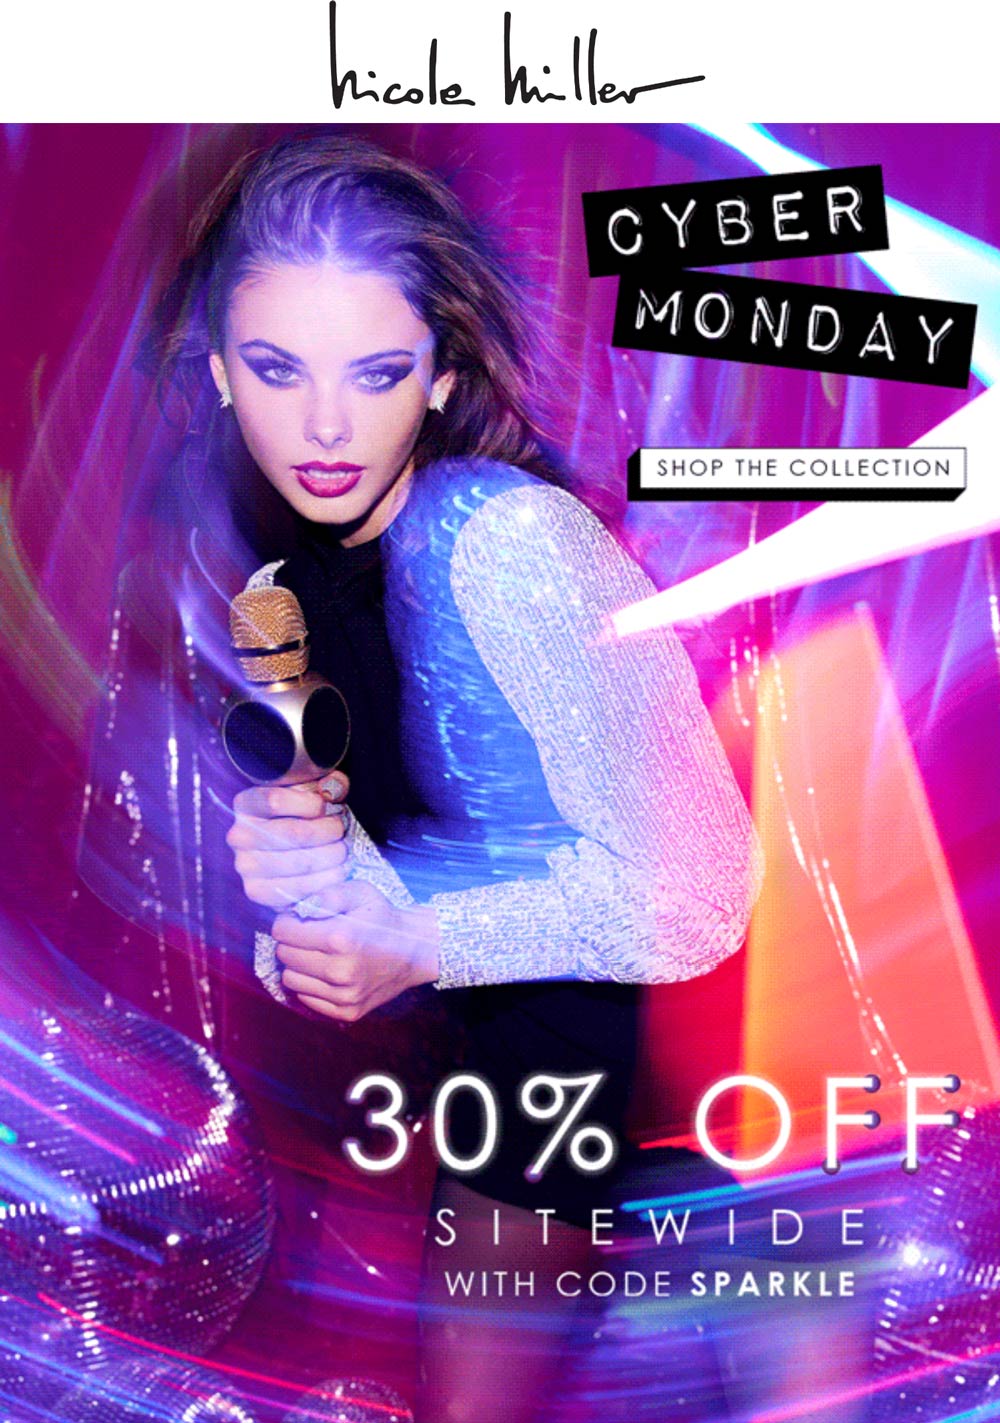 Nicole Miller stores Coupon  30% off everything at Nicole Miller via promo code SPARKLE #nicolemiller 